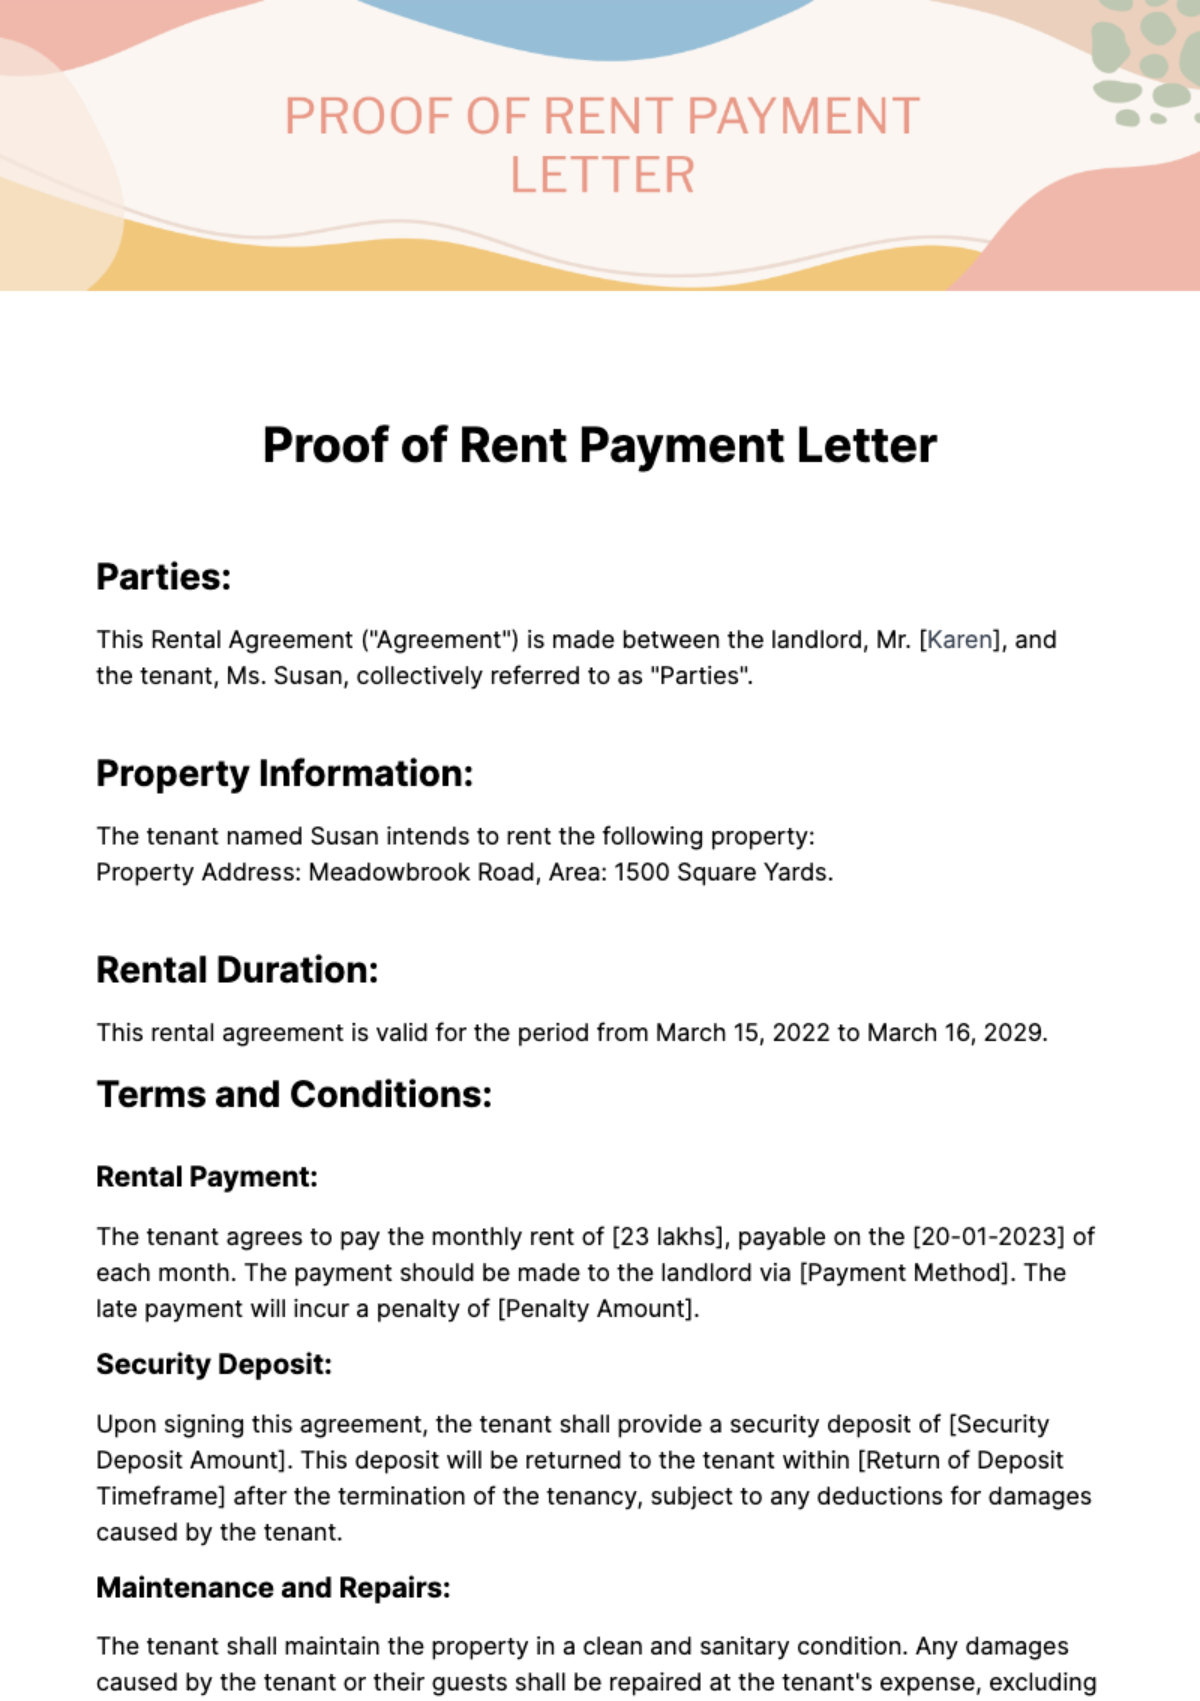 Free Proof of Rent Payment Letter Template